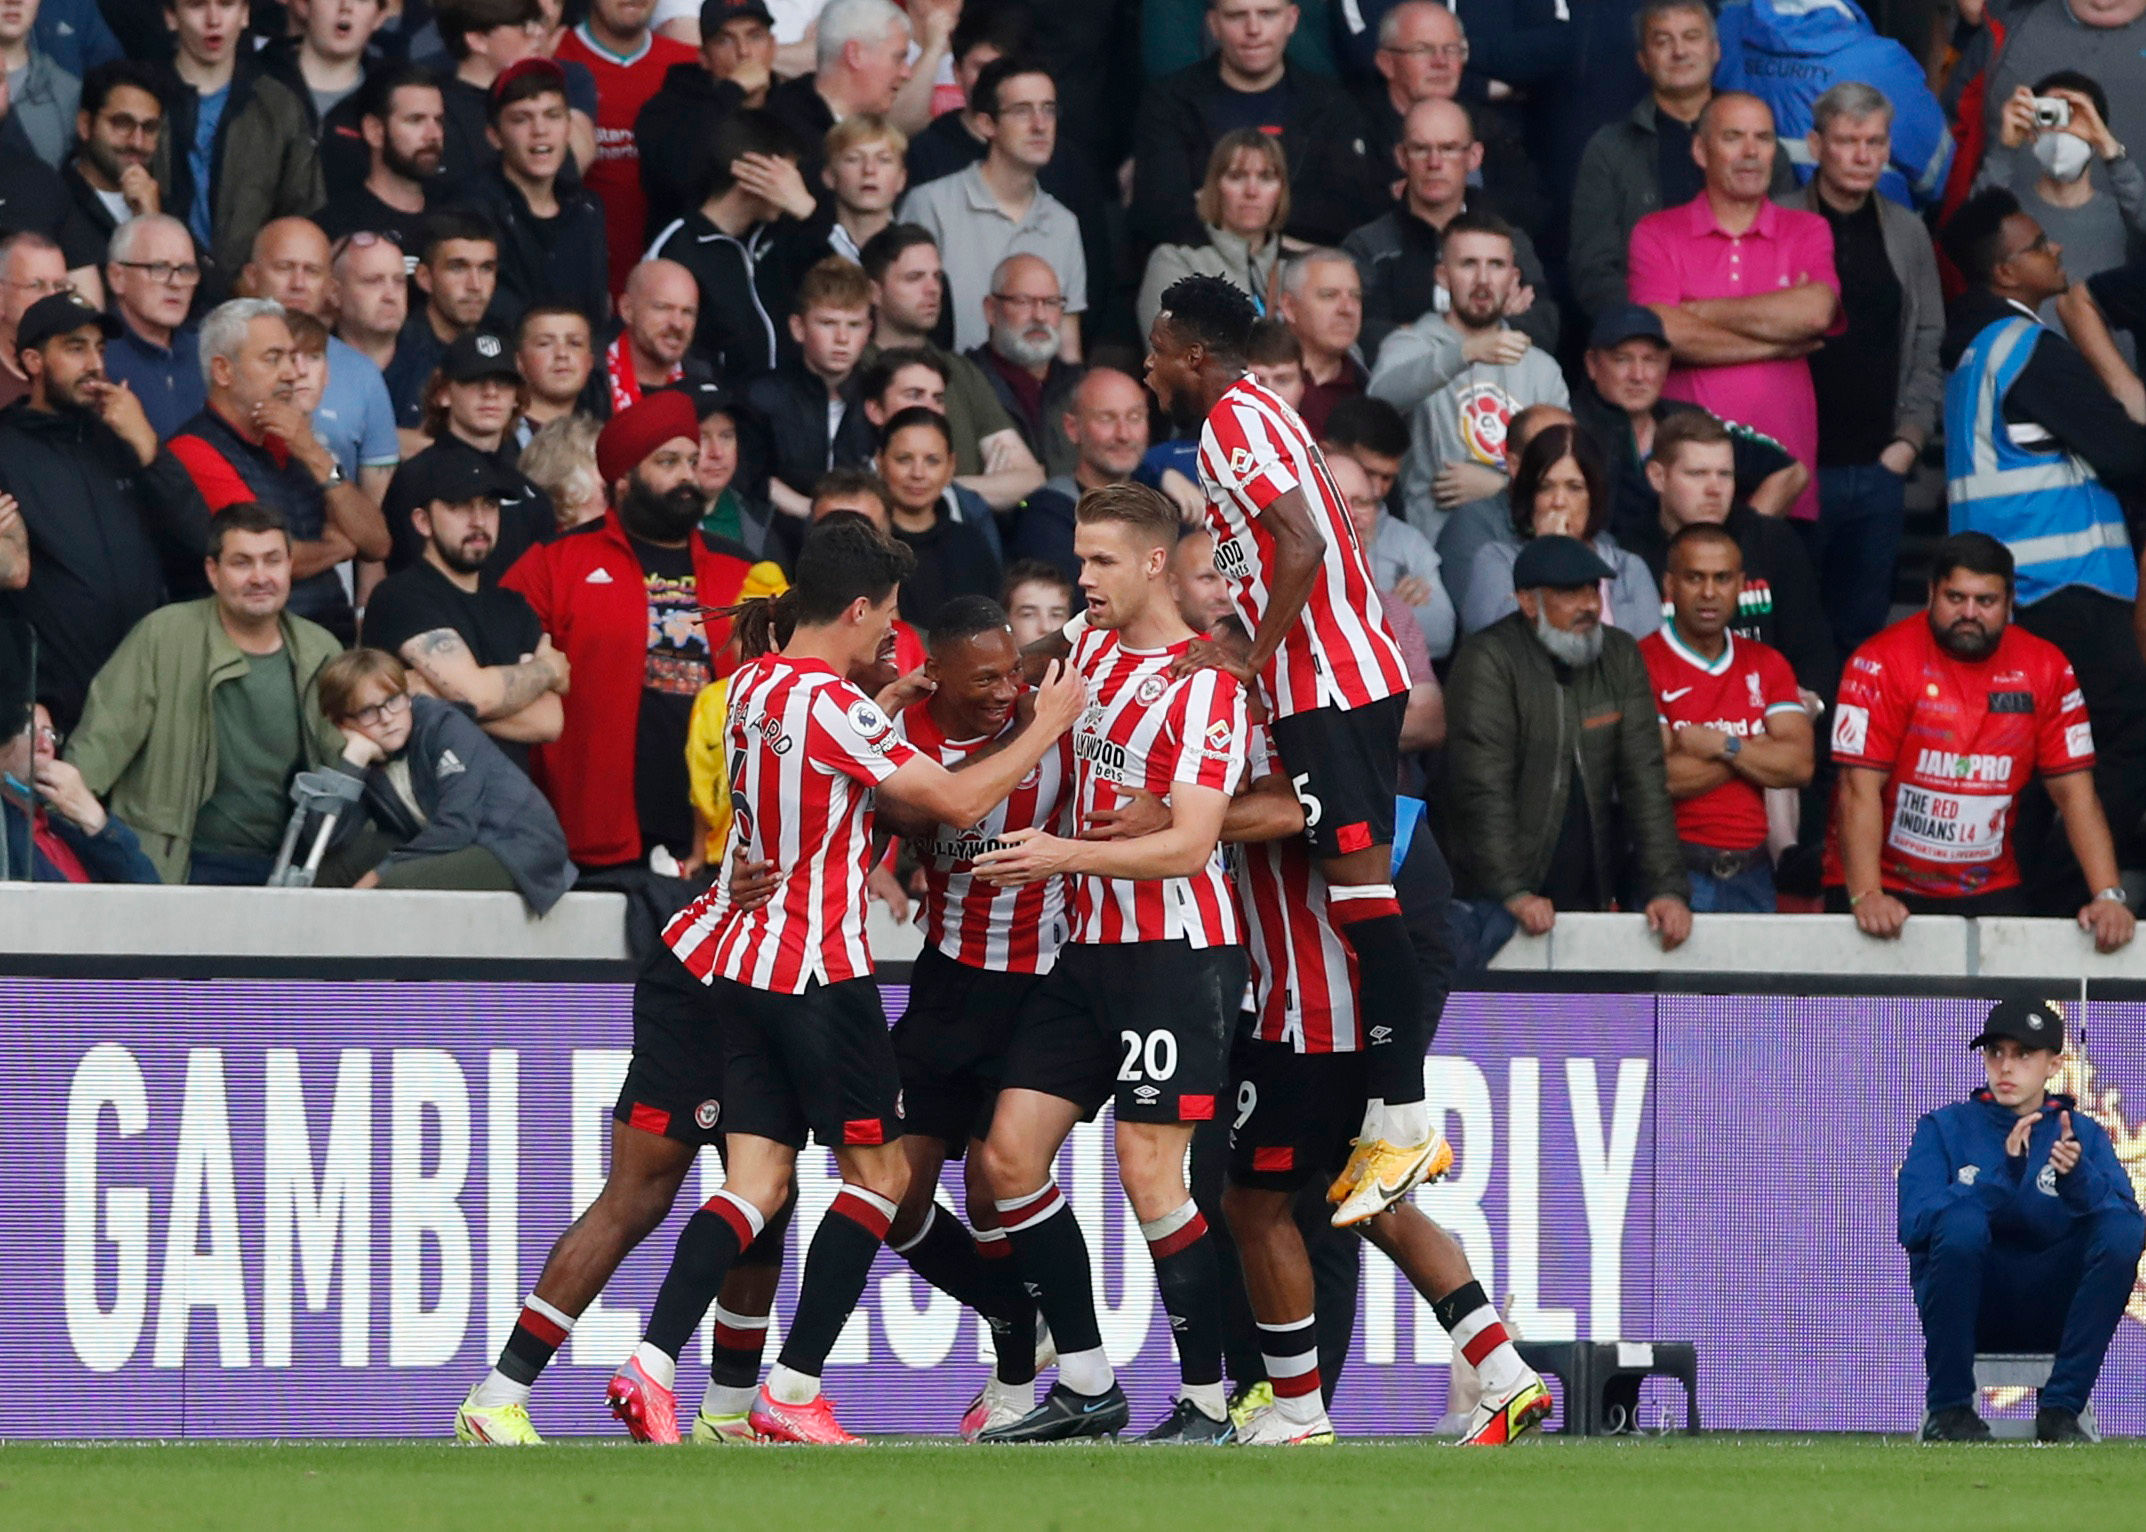 Fans laud ‘giant-killers’ Brentford after the Bees sting Liverpool’s defence